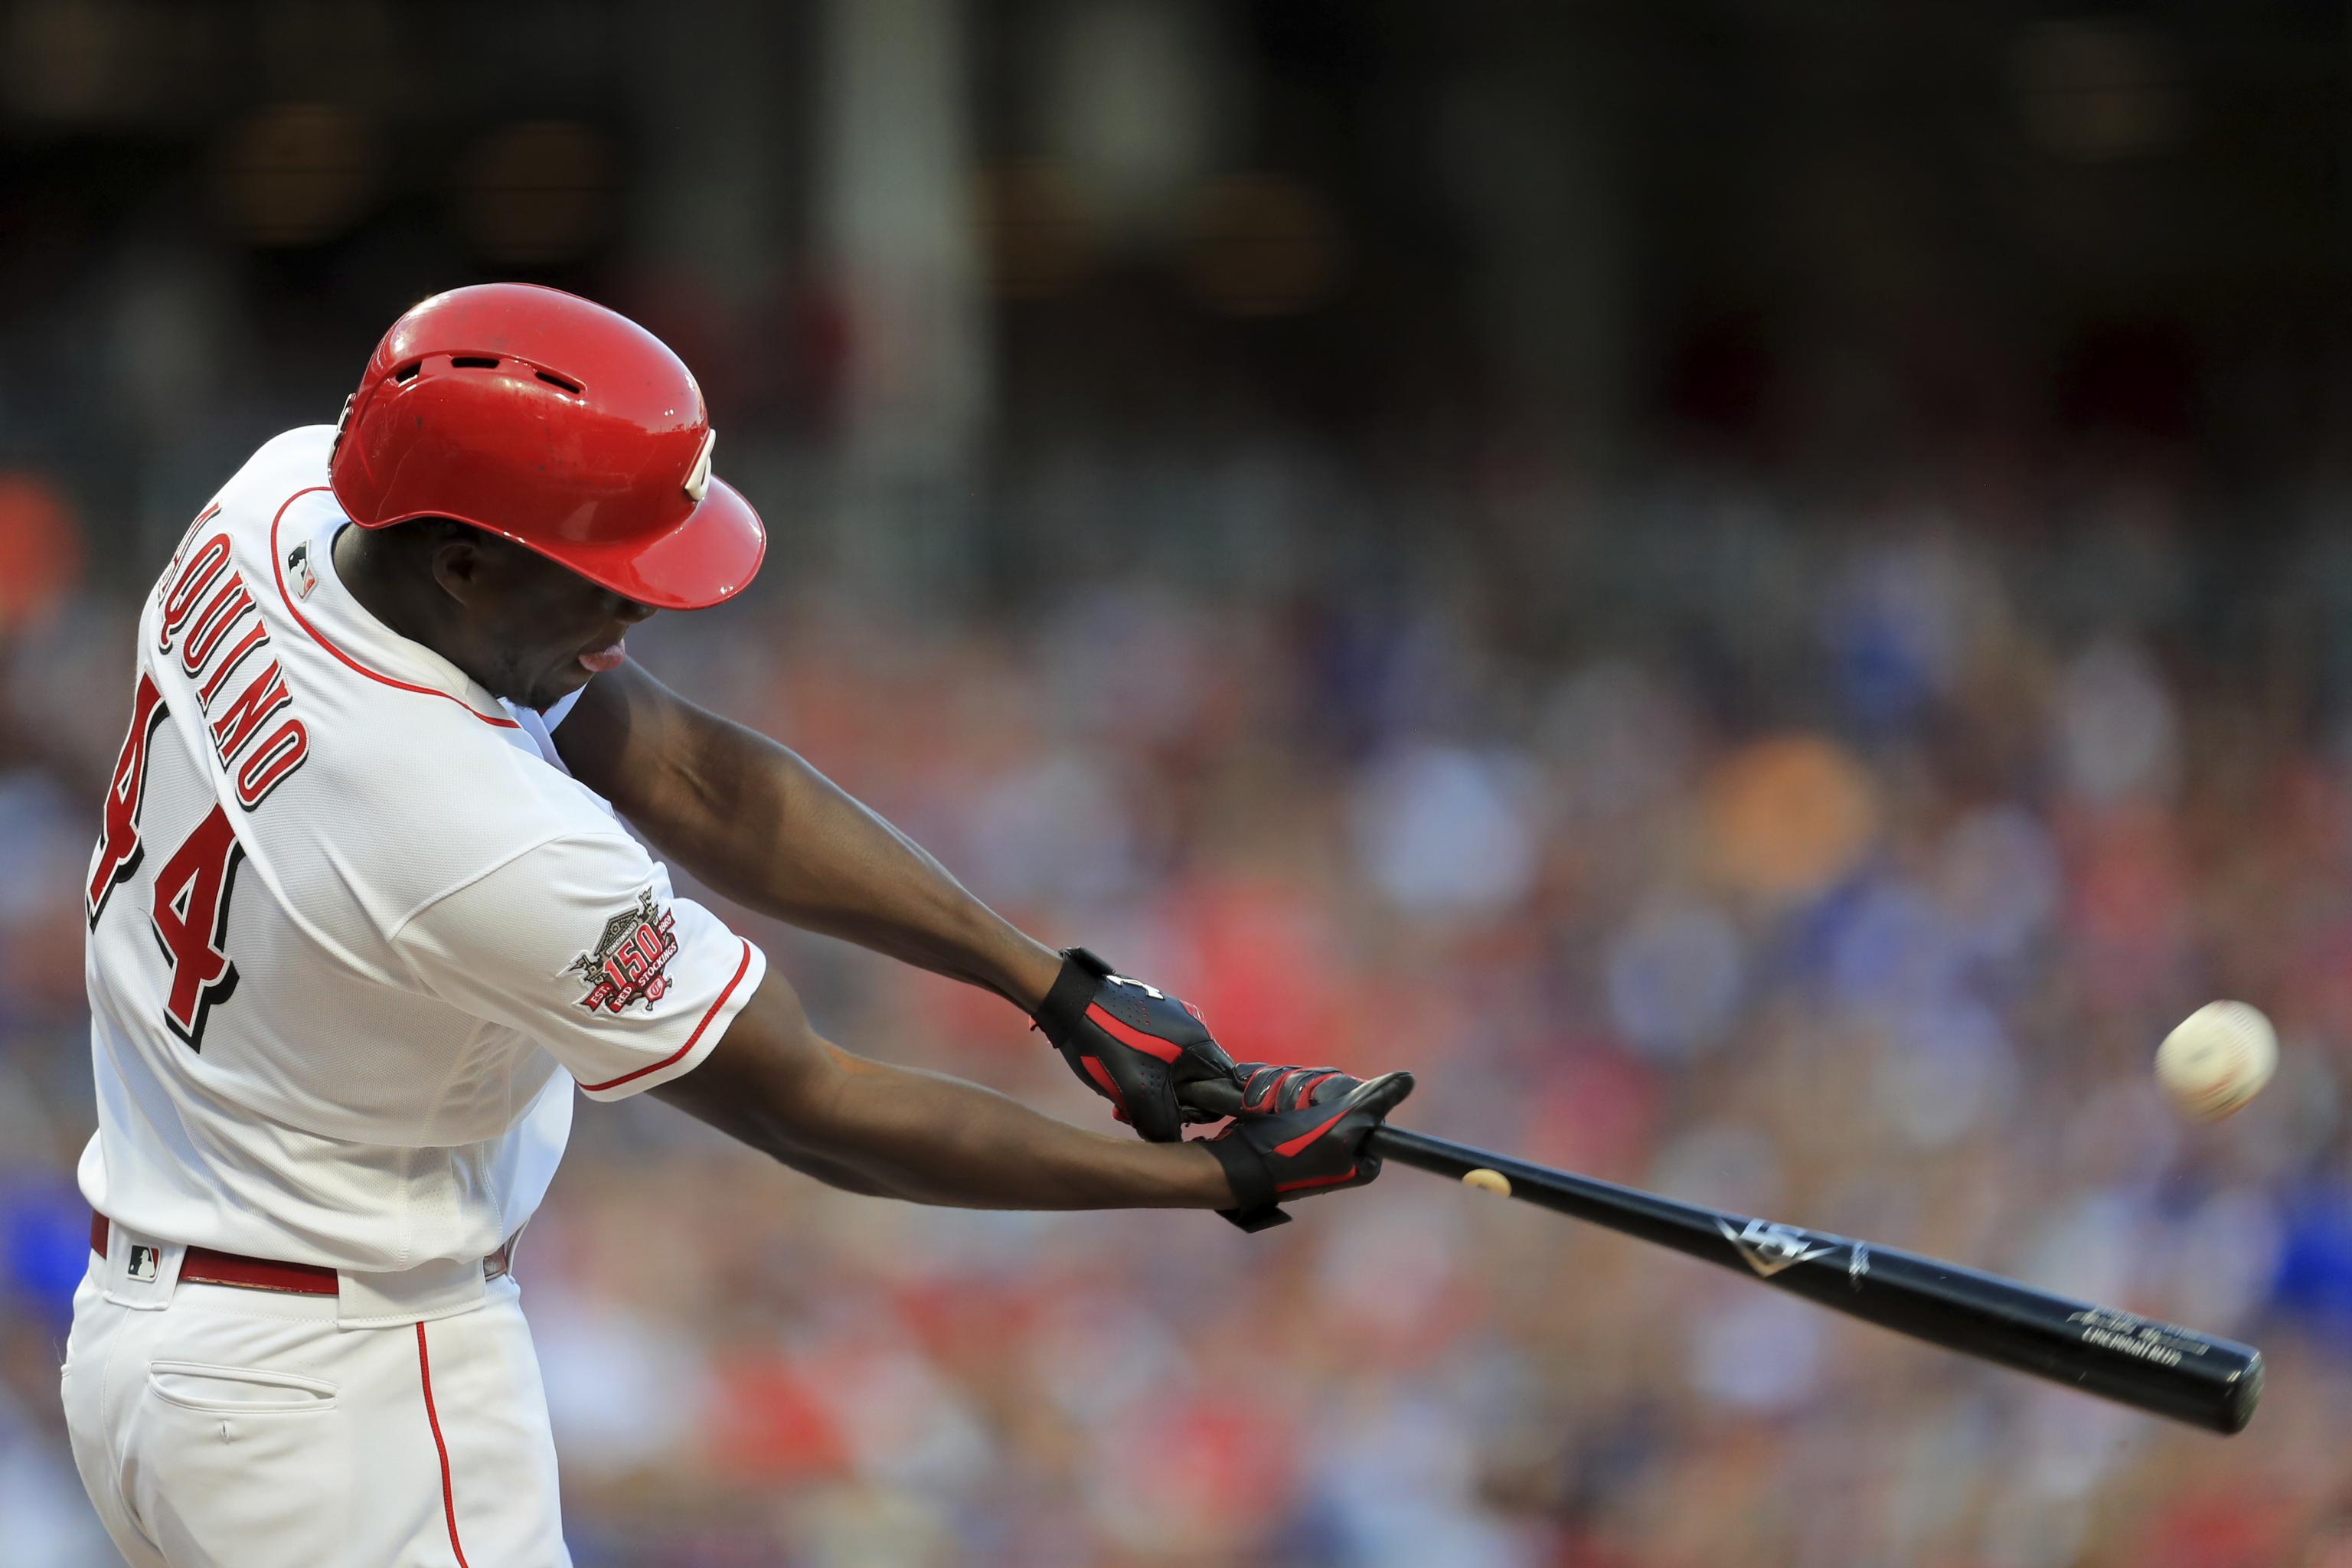 Aristides Aquino homers three times to lift Reds to a win over Cubs